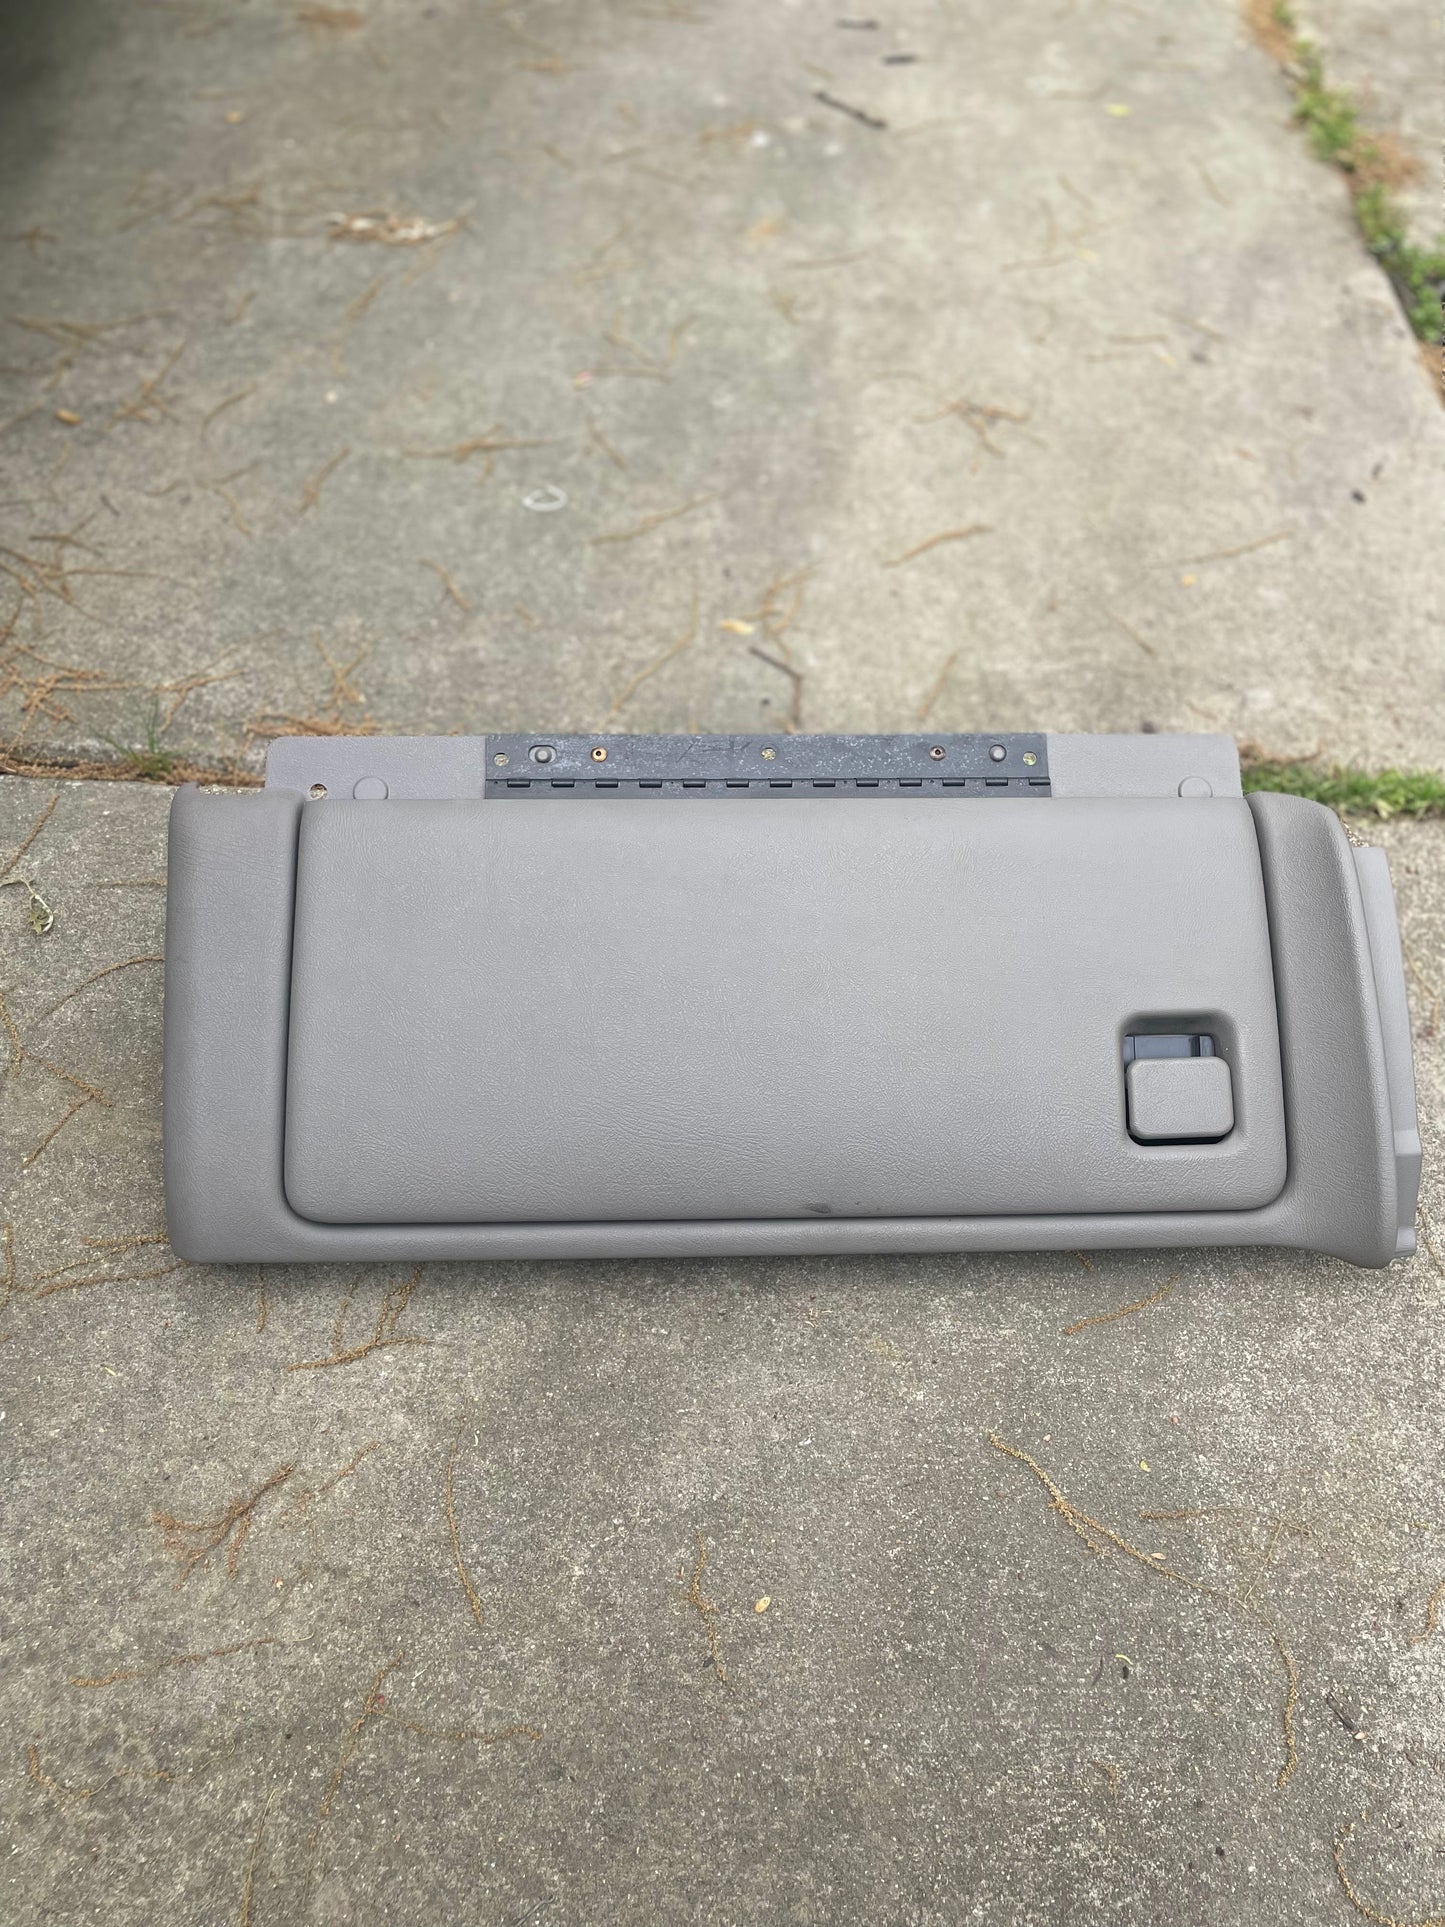 OEM Center Console in Light Gray 92I for 2003-2007 Chevy Silverado, Tahoe, Suburban, and more